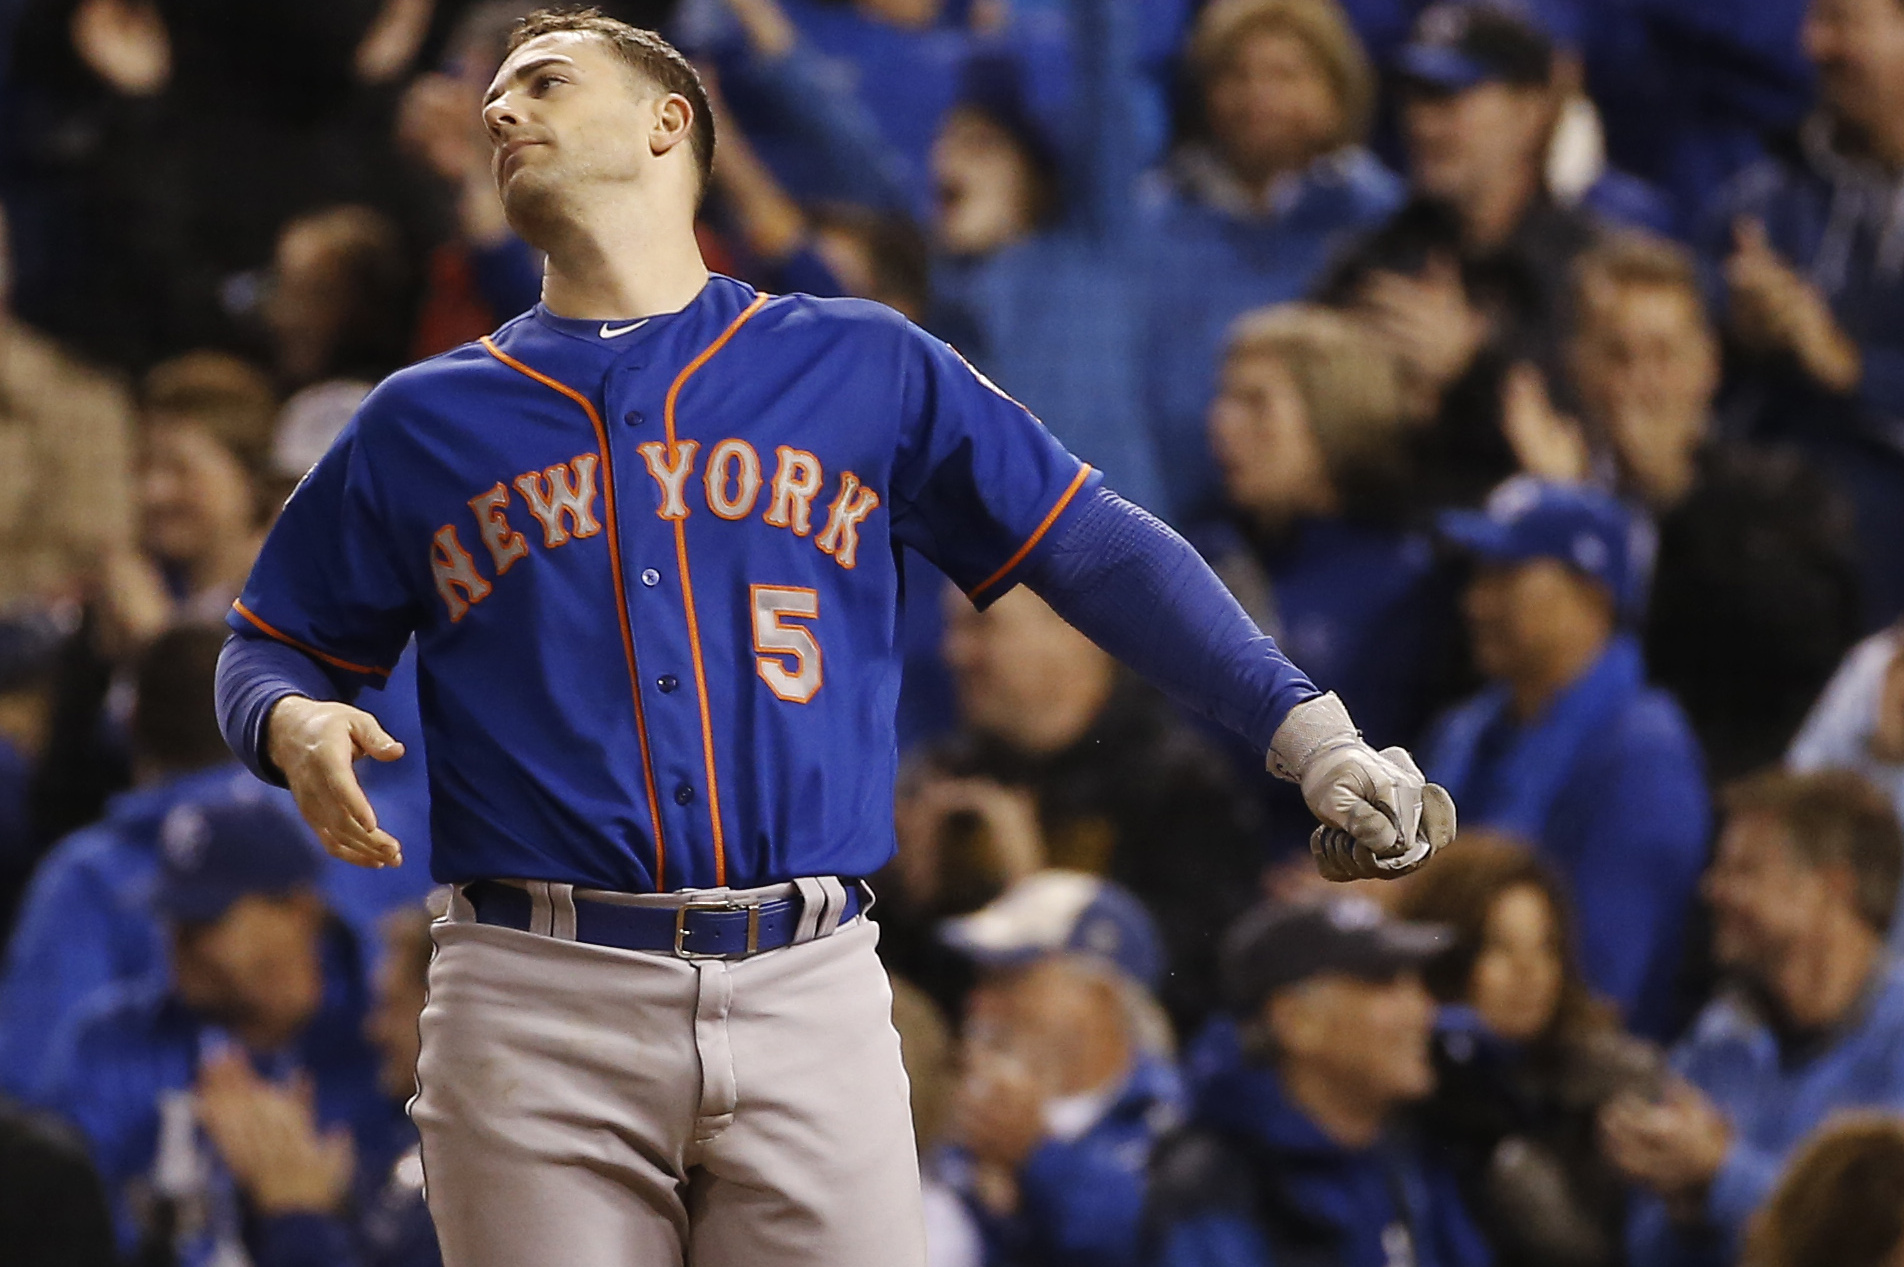 Is David Wright in the worst slump of his career